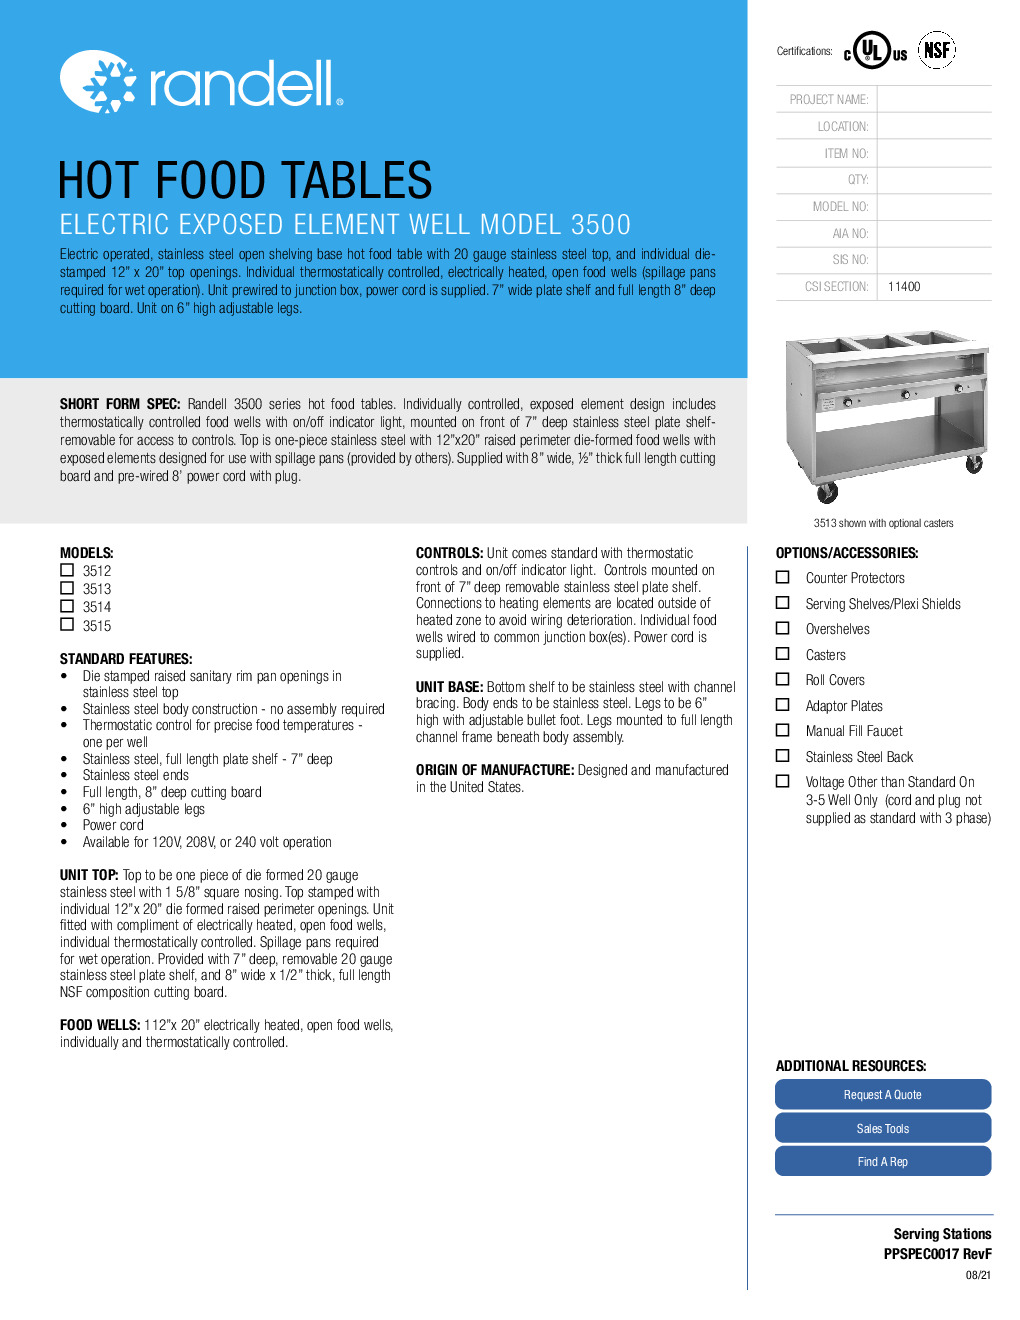 Randell 3514-240 Electric Hot Food Serving Counter